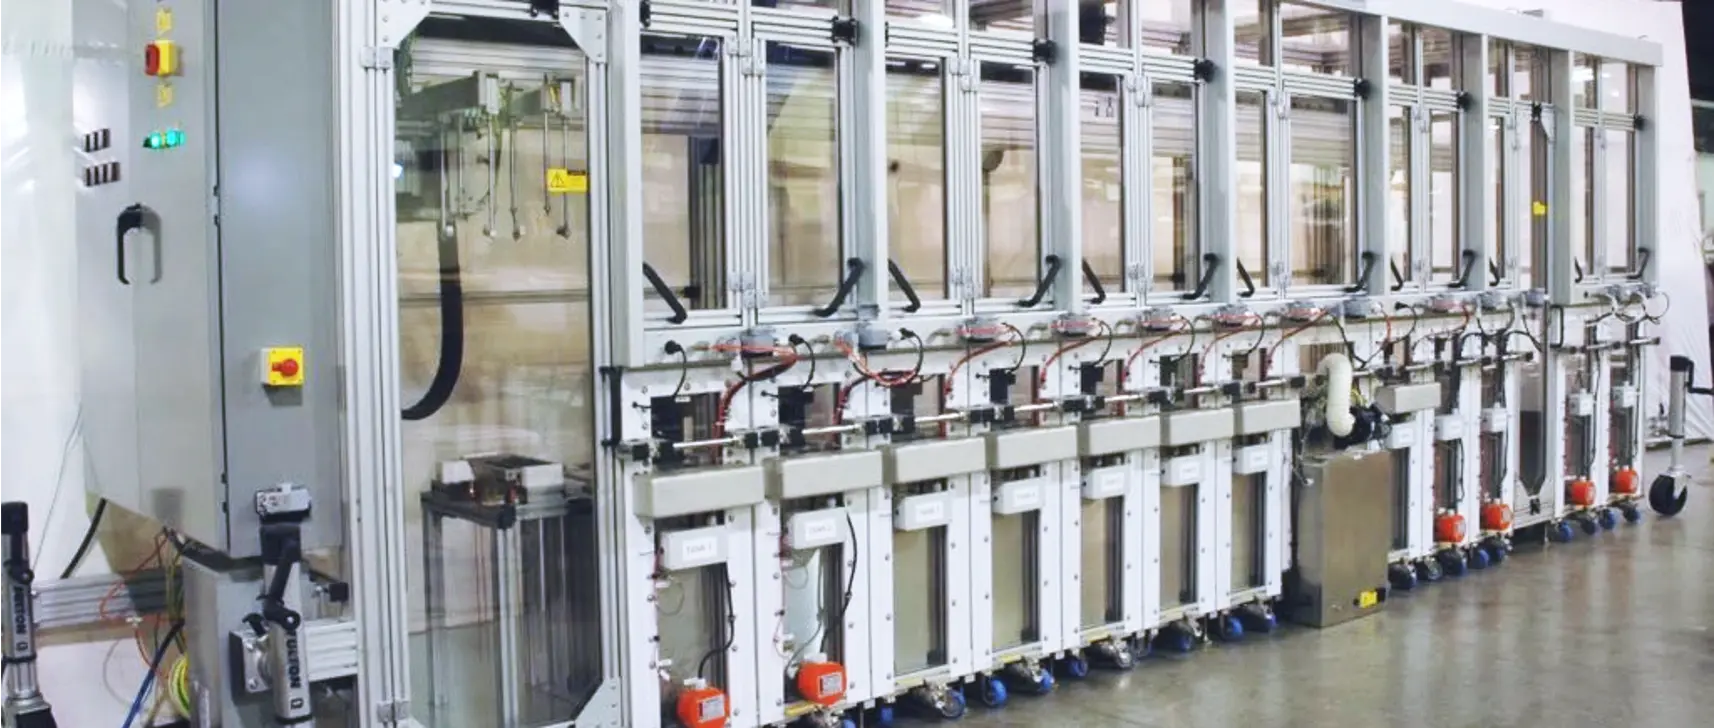 A row of machines sitting inside of a building